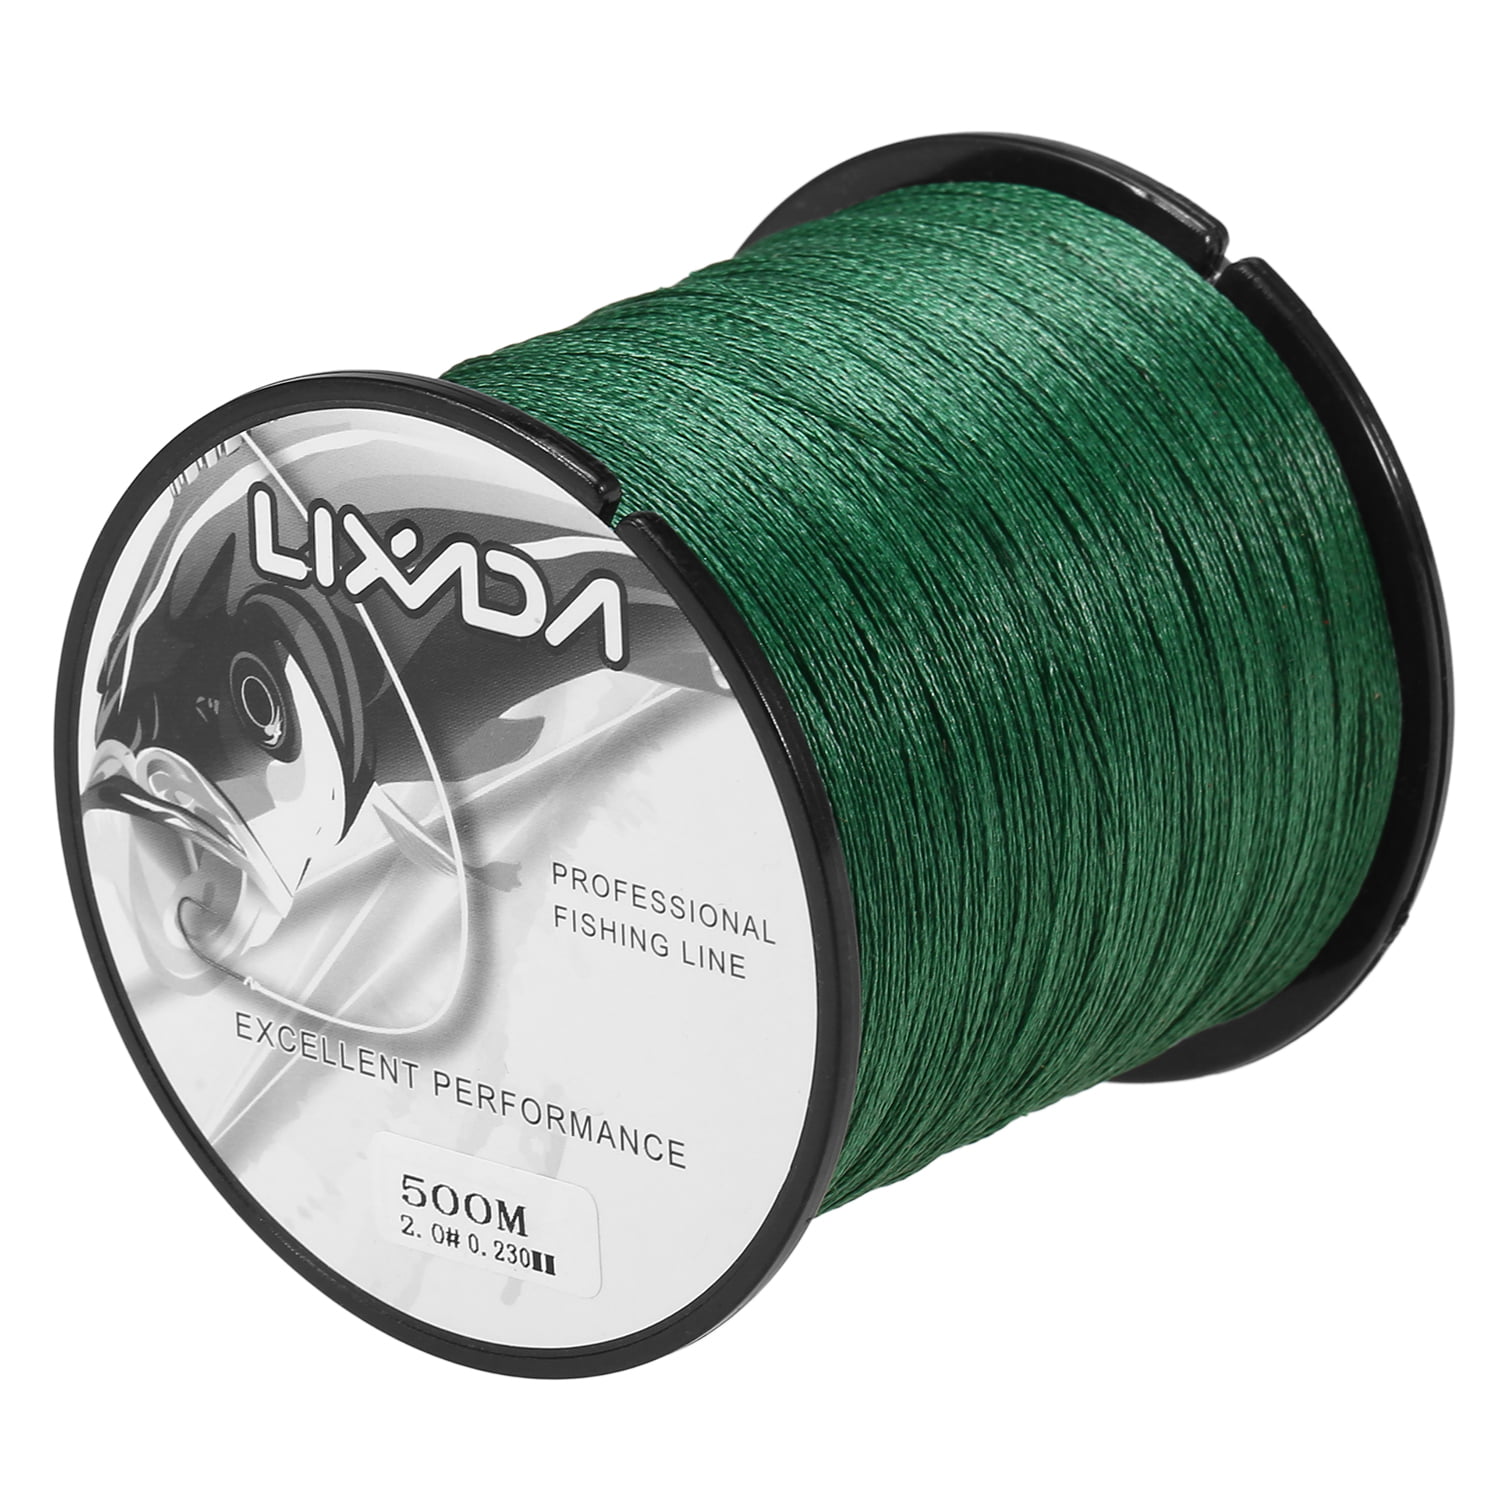 Power Pro 21100800300Y Spectra Braided Fishing Line 80lb 300 Yd for sale online 